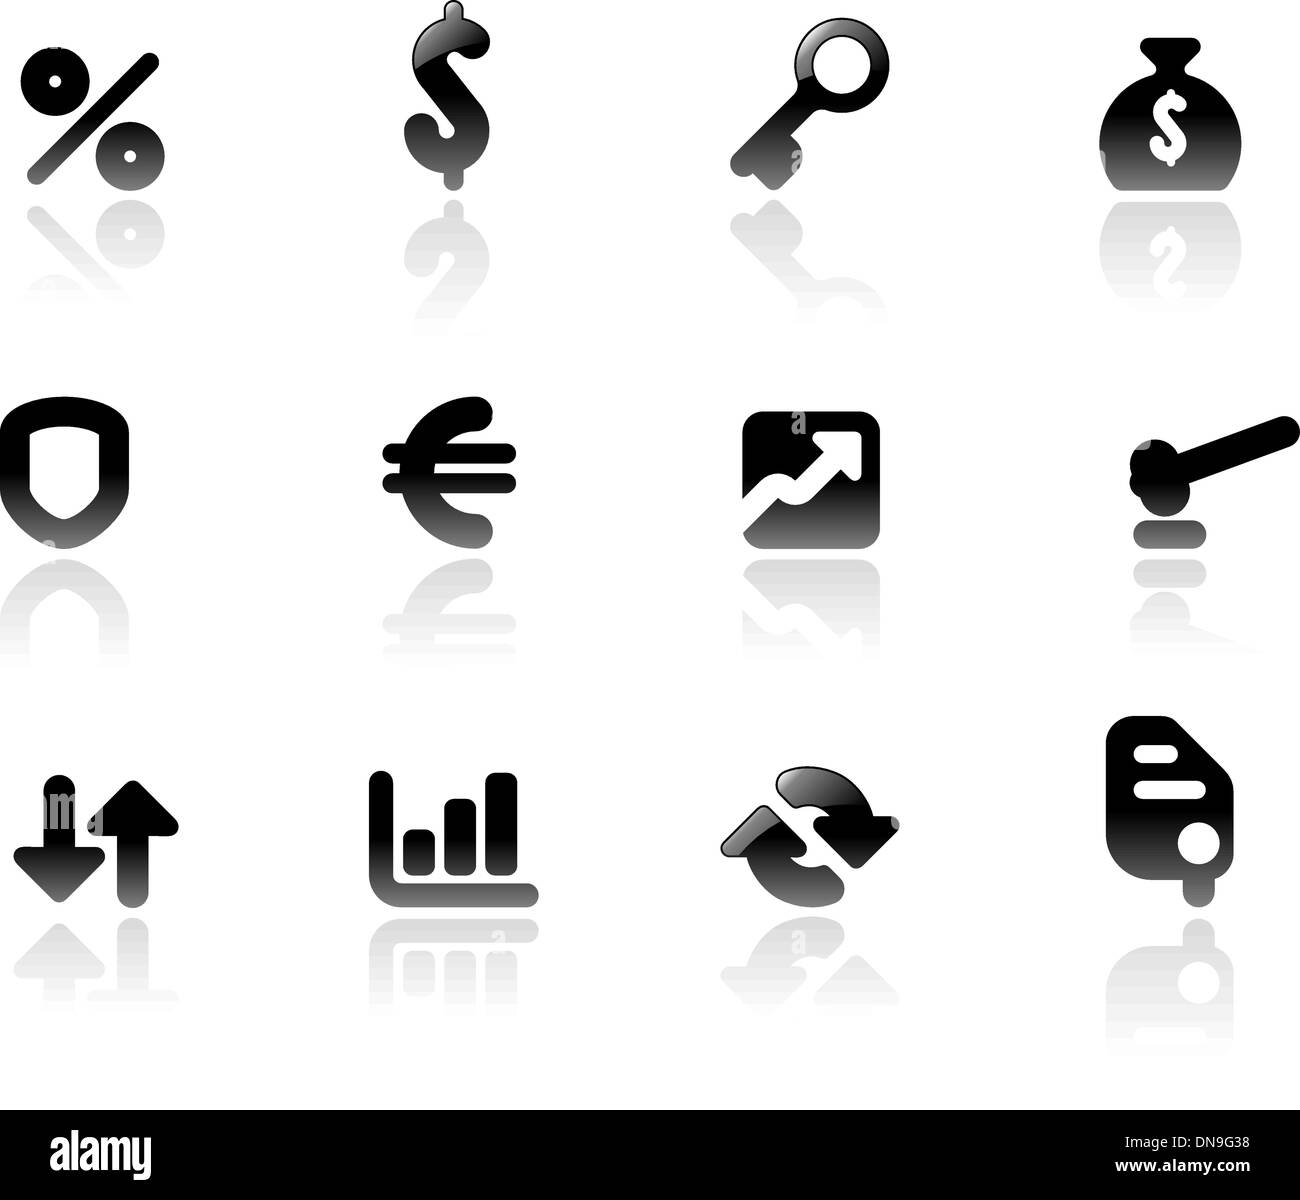 Perfect icons for business and finance Stock Vector